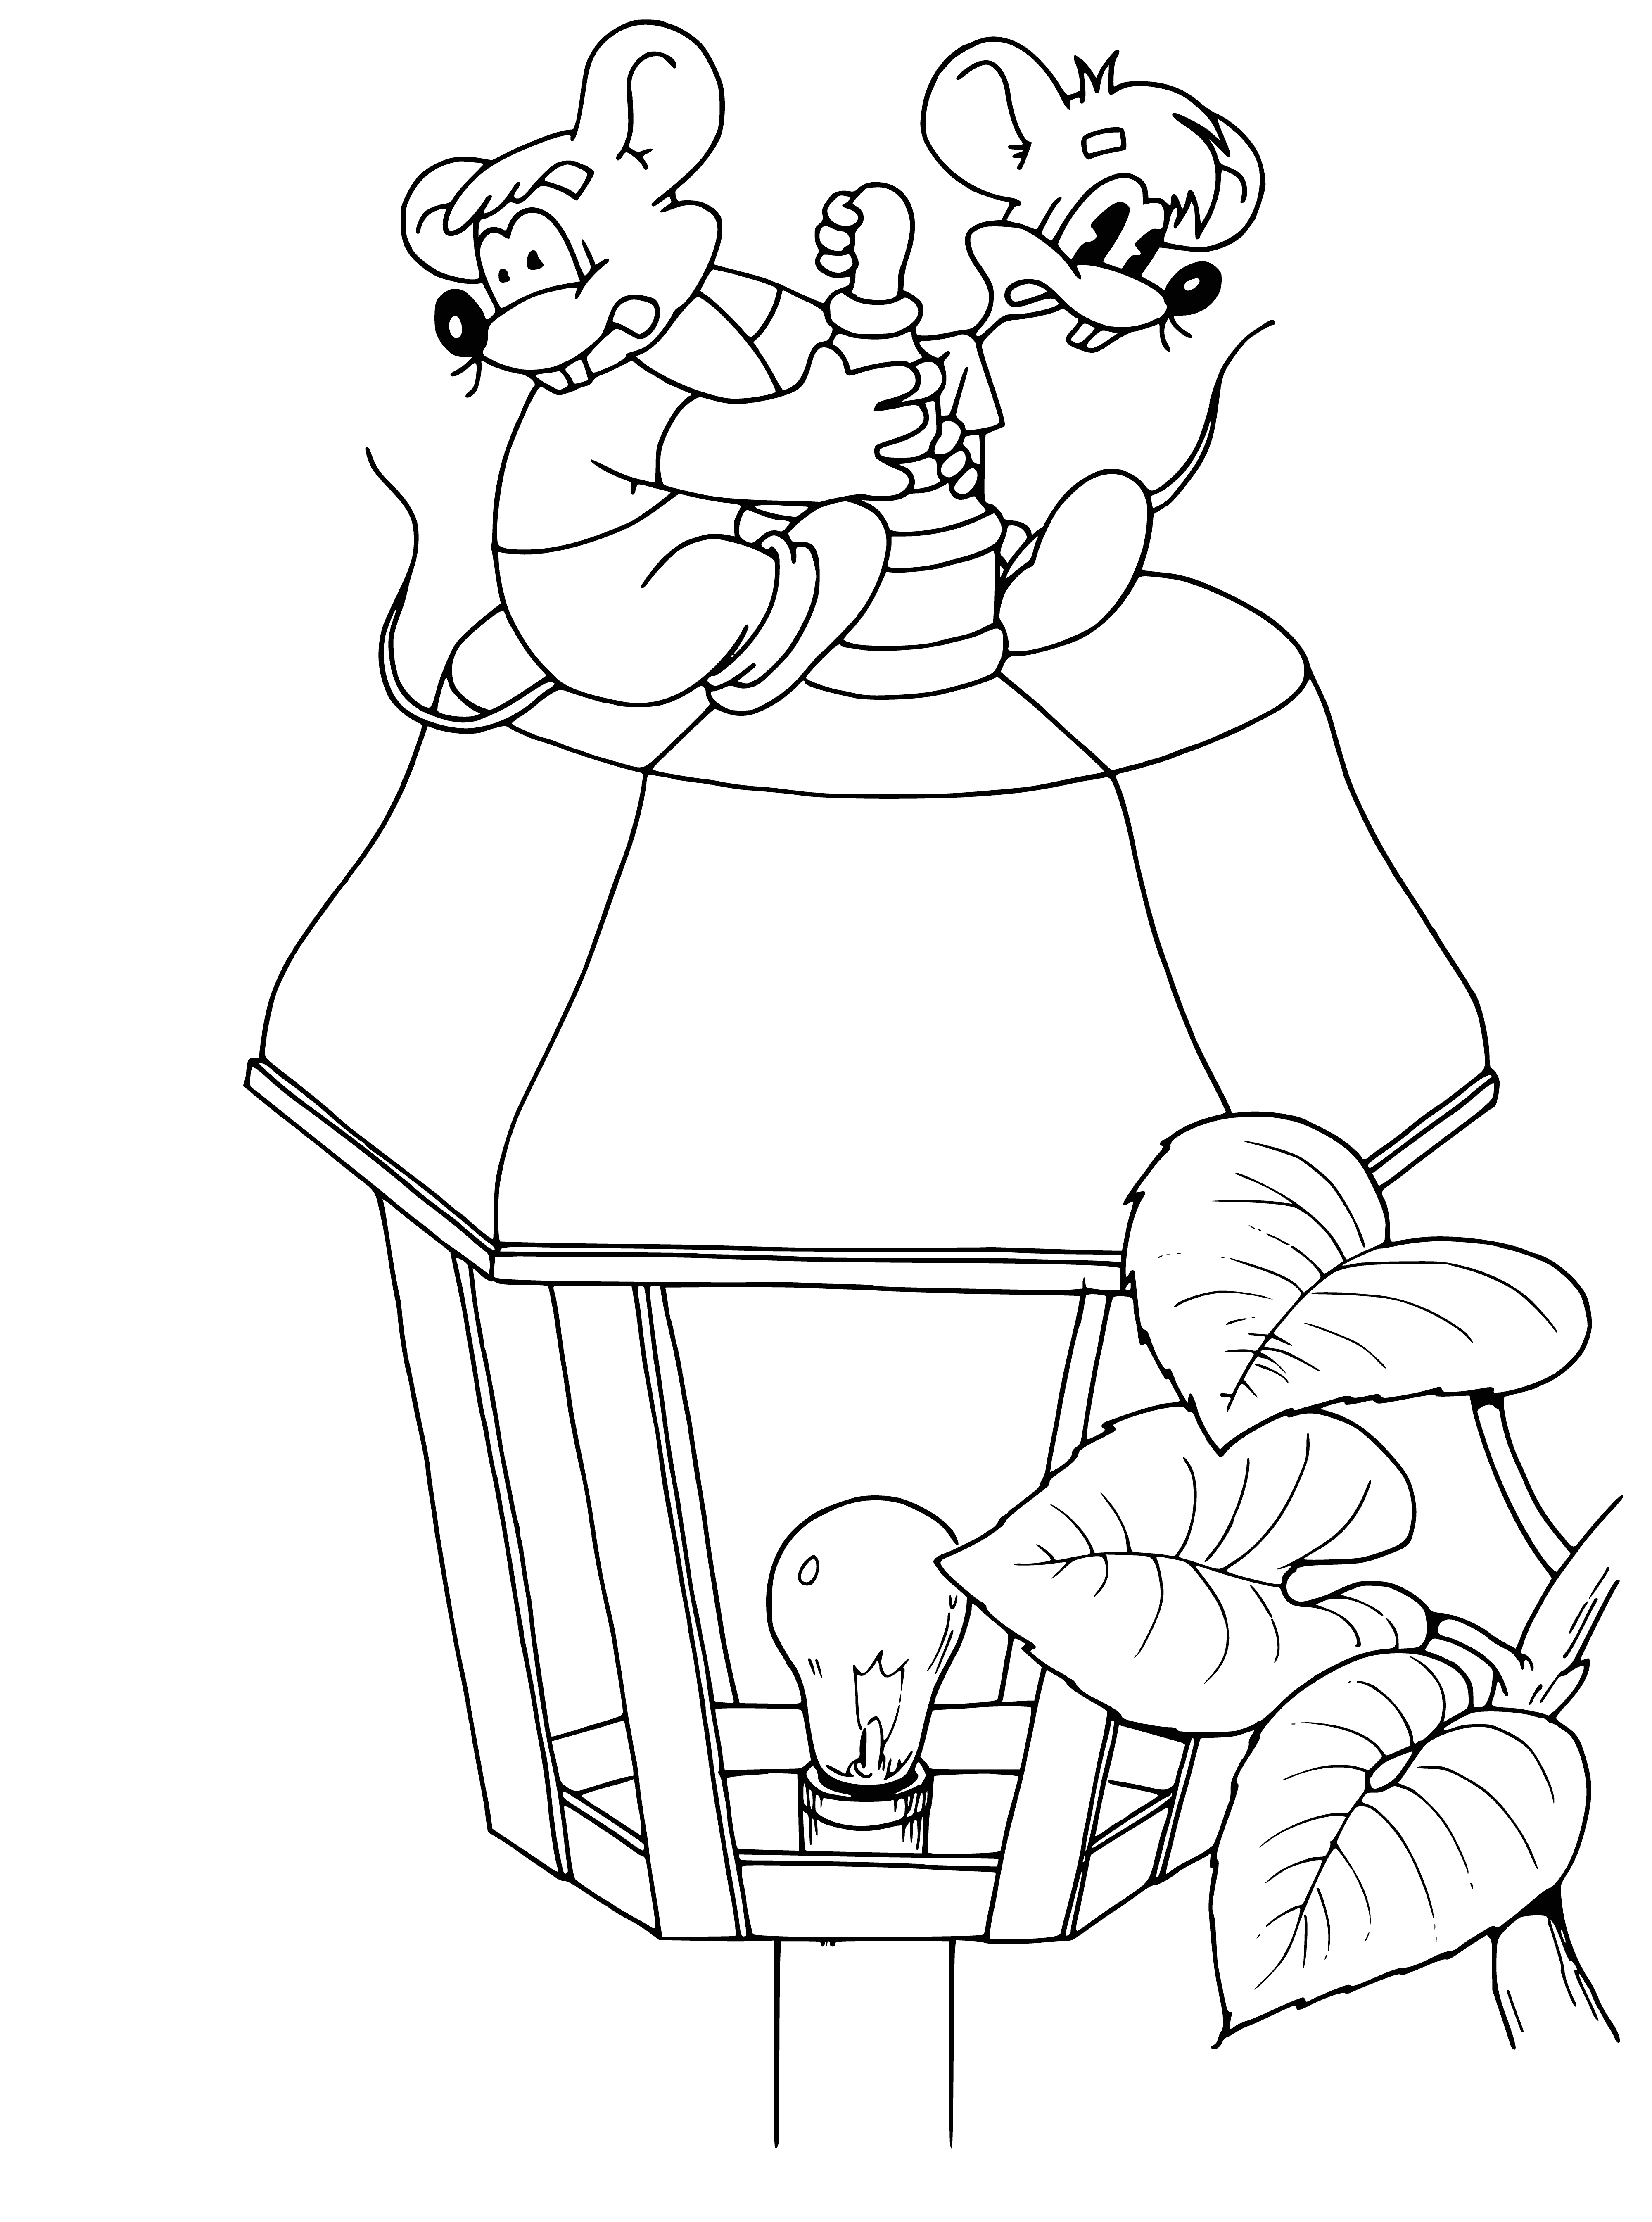 coloring page: A content cat perched atop a stack of books, its fur illuminated in warm shades of orange & brown in the lantern's yellow light.